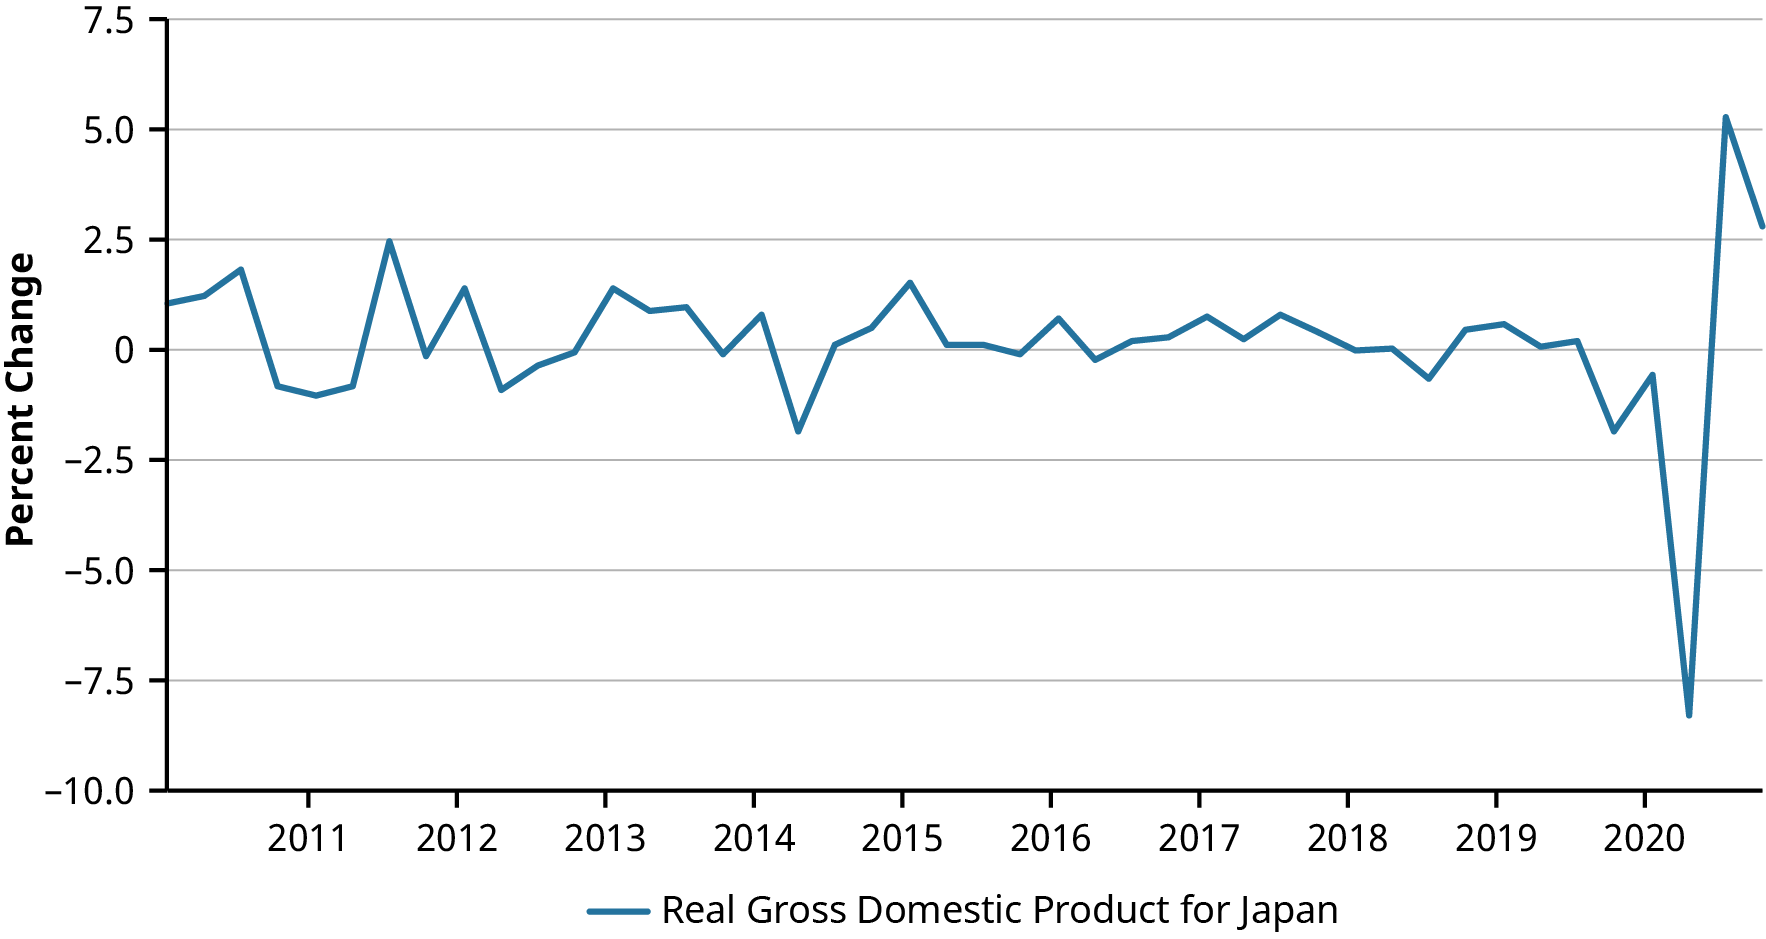 Graphical representation of percent change for Gross Domestic Product for Japan, 2010–2020. It shows that the real GDP for Japan was steady from 2011 to 2020, never falling below negative 2.5 percent change or rising above 2.5 percent change. In 2020, the percent change went to more than negative 7.5 percent before quickly rising to 5 percent change.